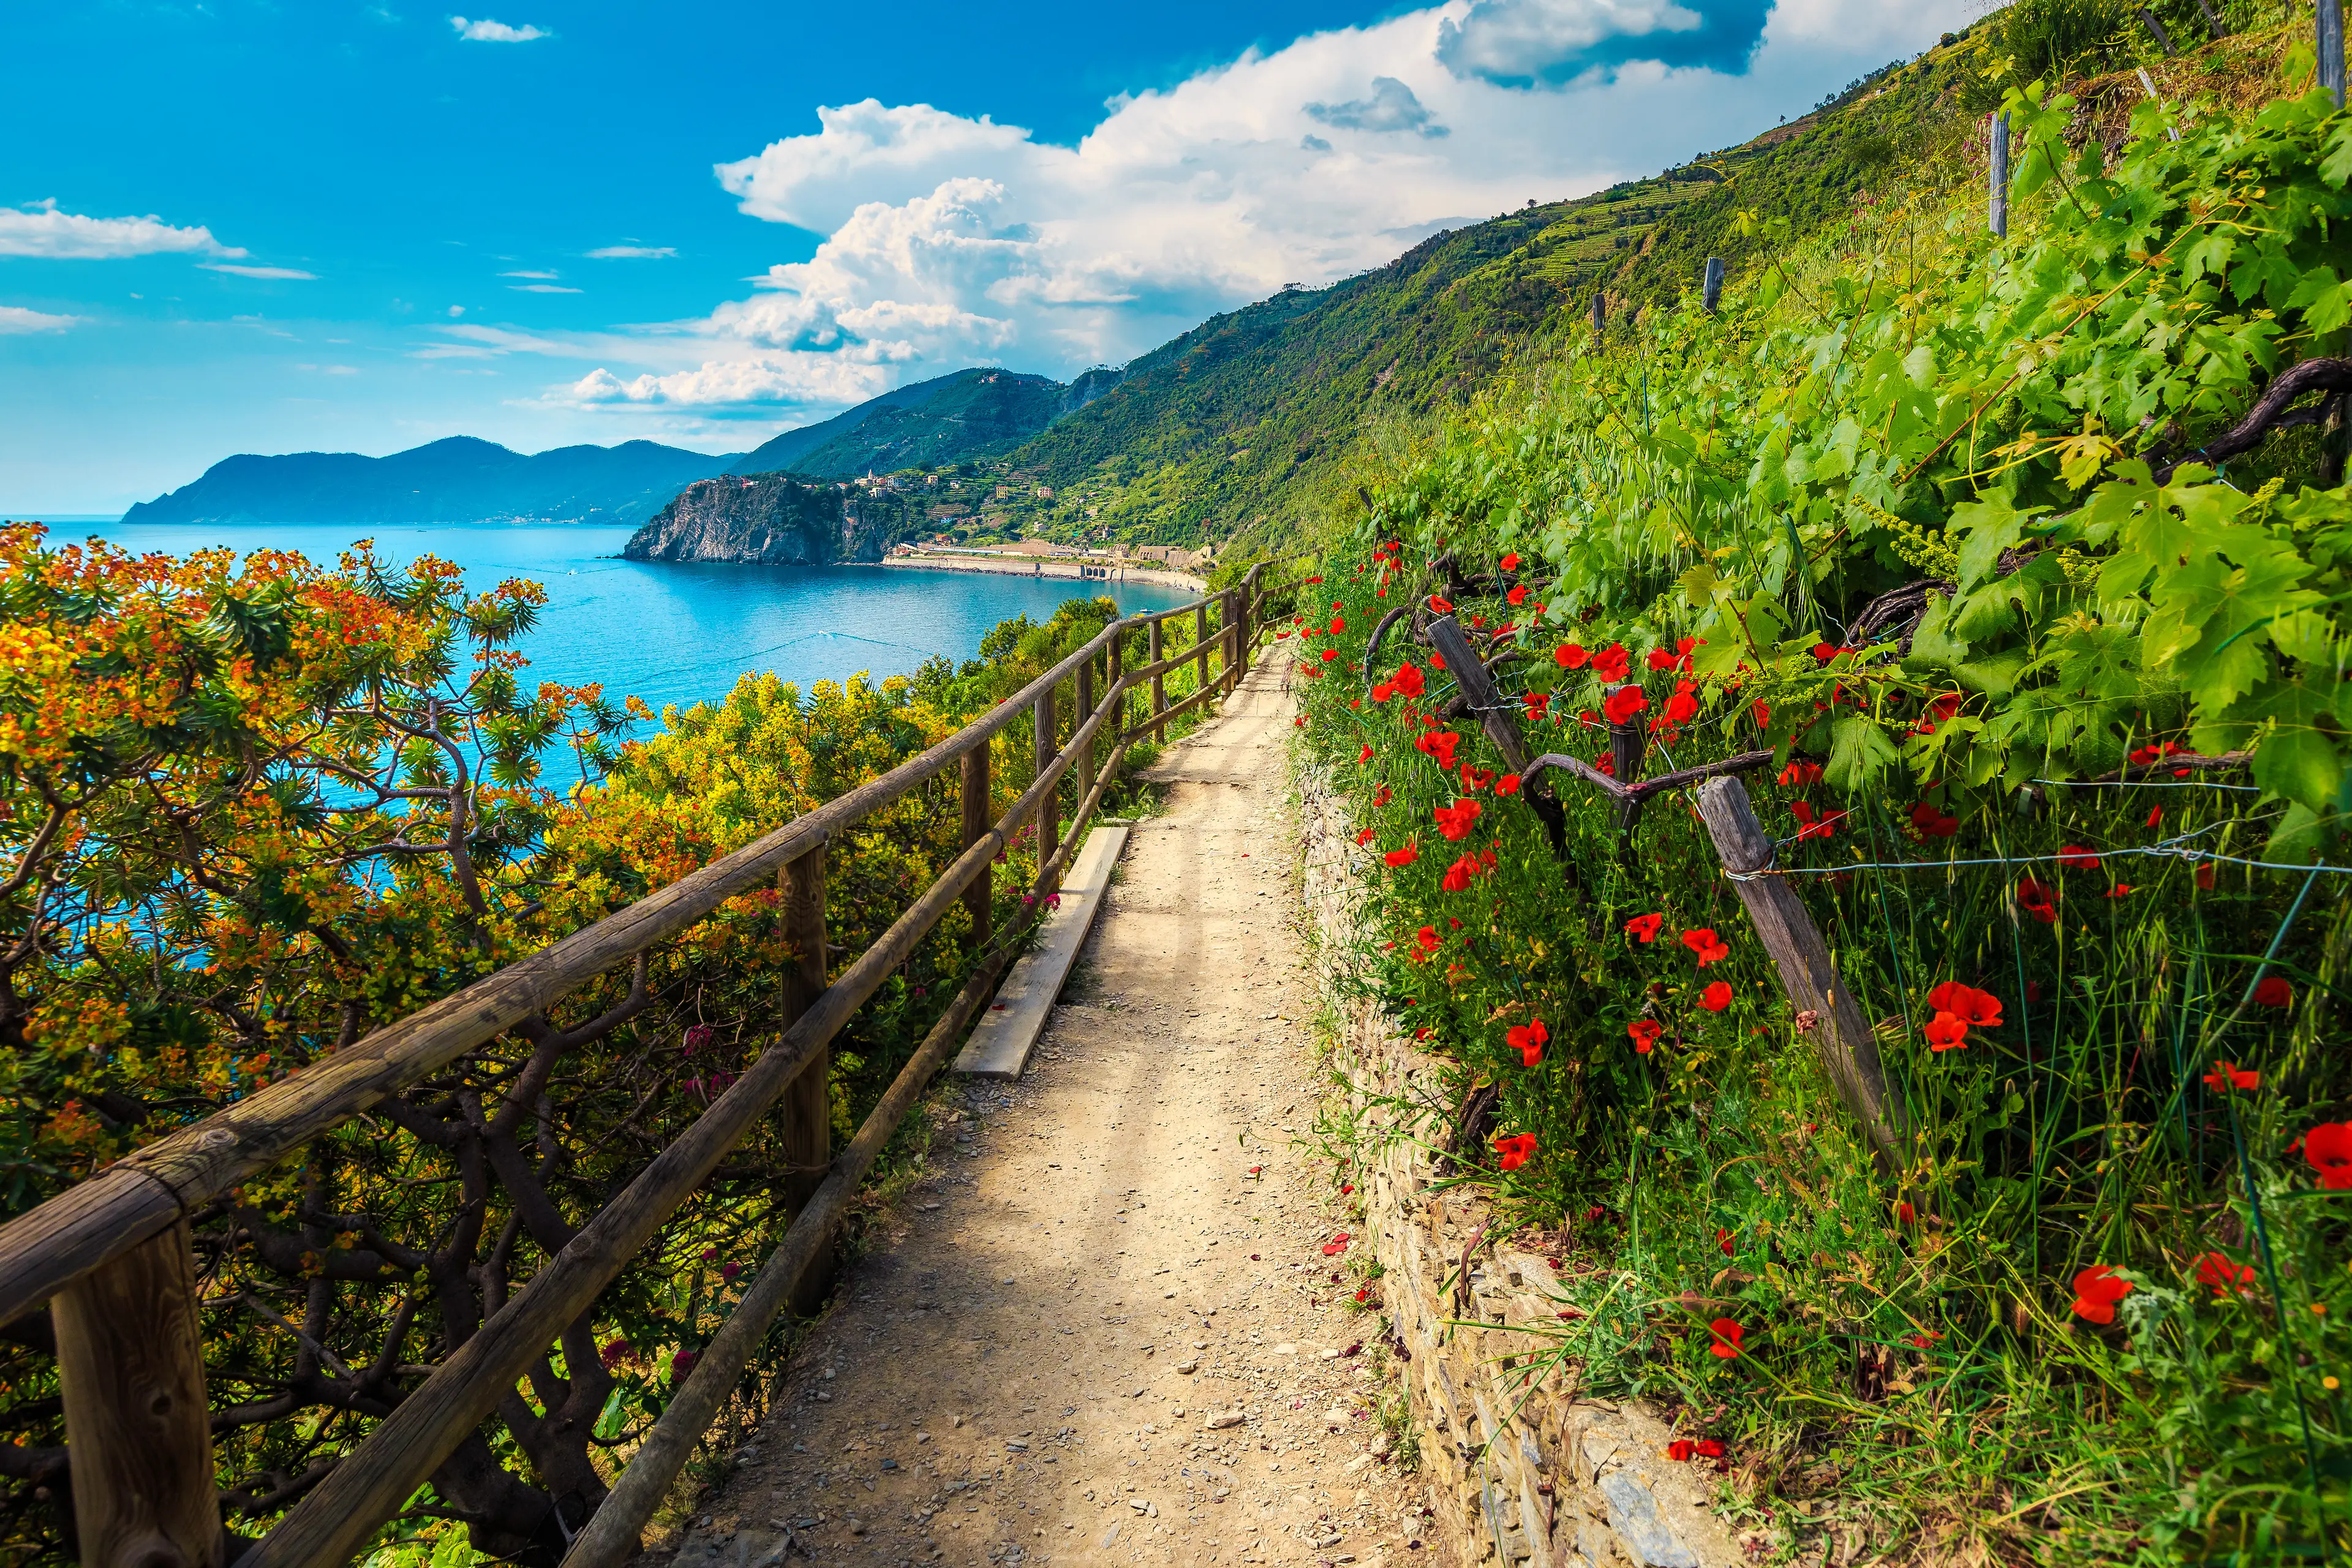 1-Day Solo Relaxation and Sightseeing in Cinque Terre, Italy